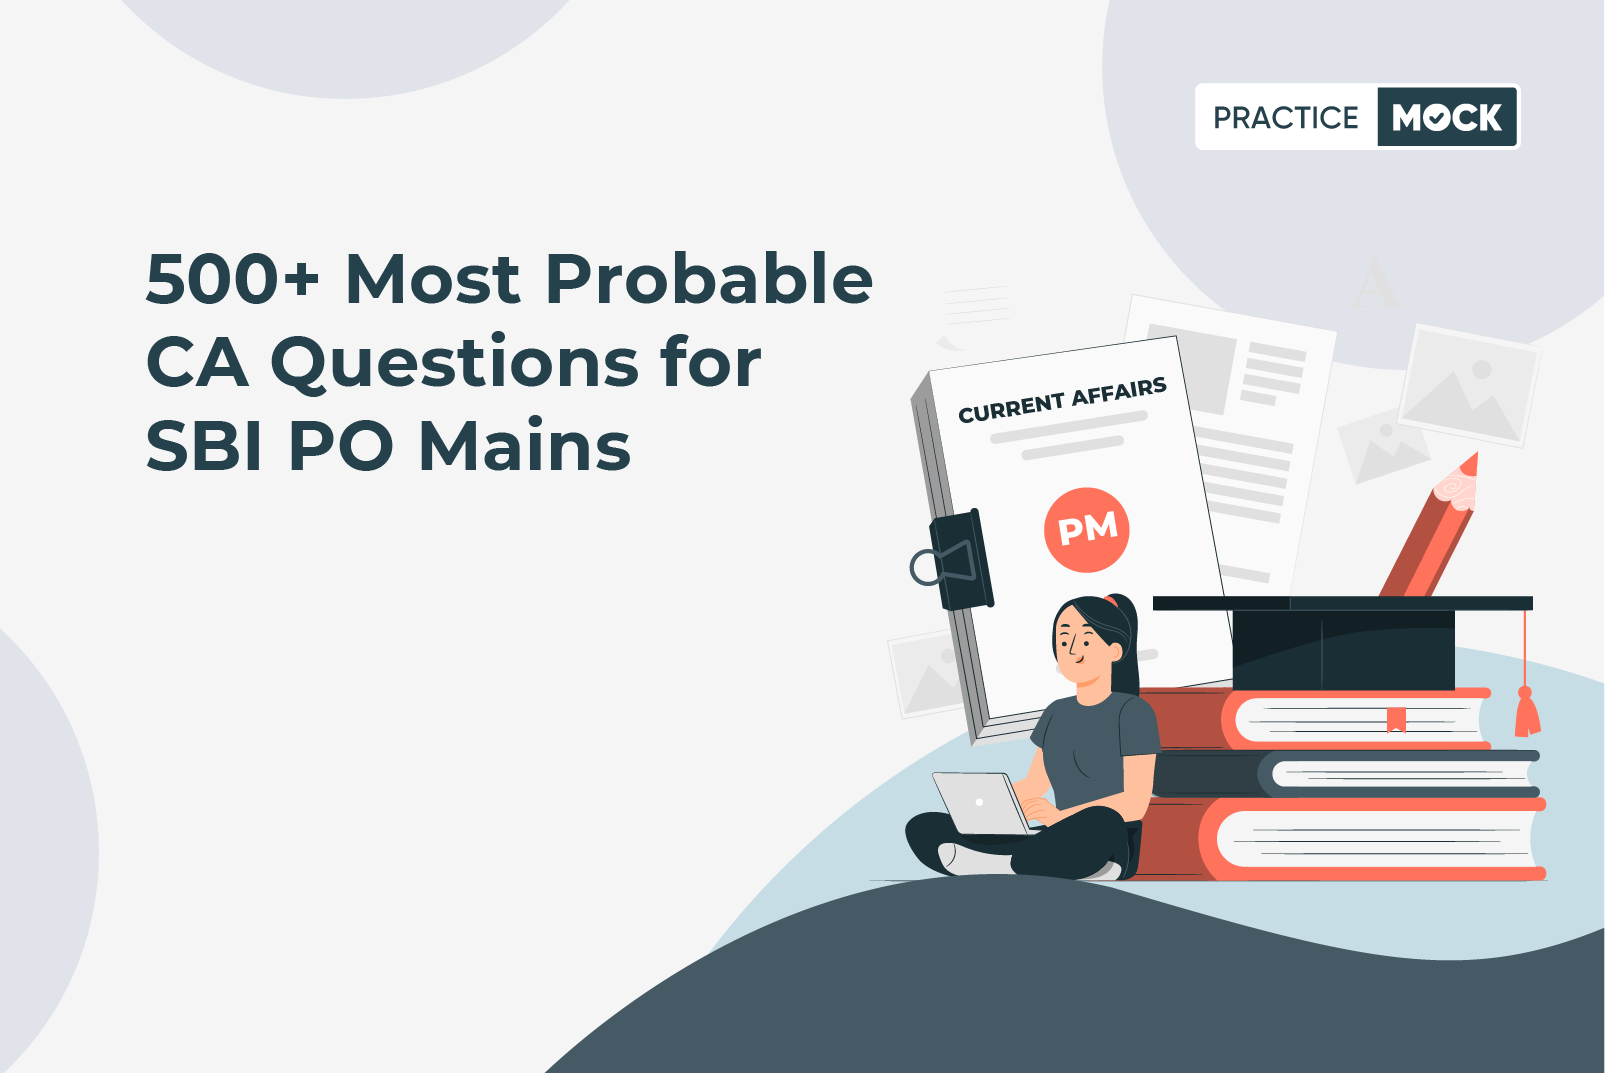 500+ Most Probable CA Questions